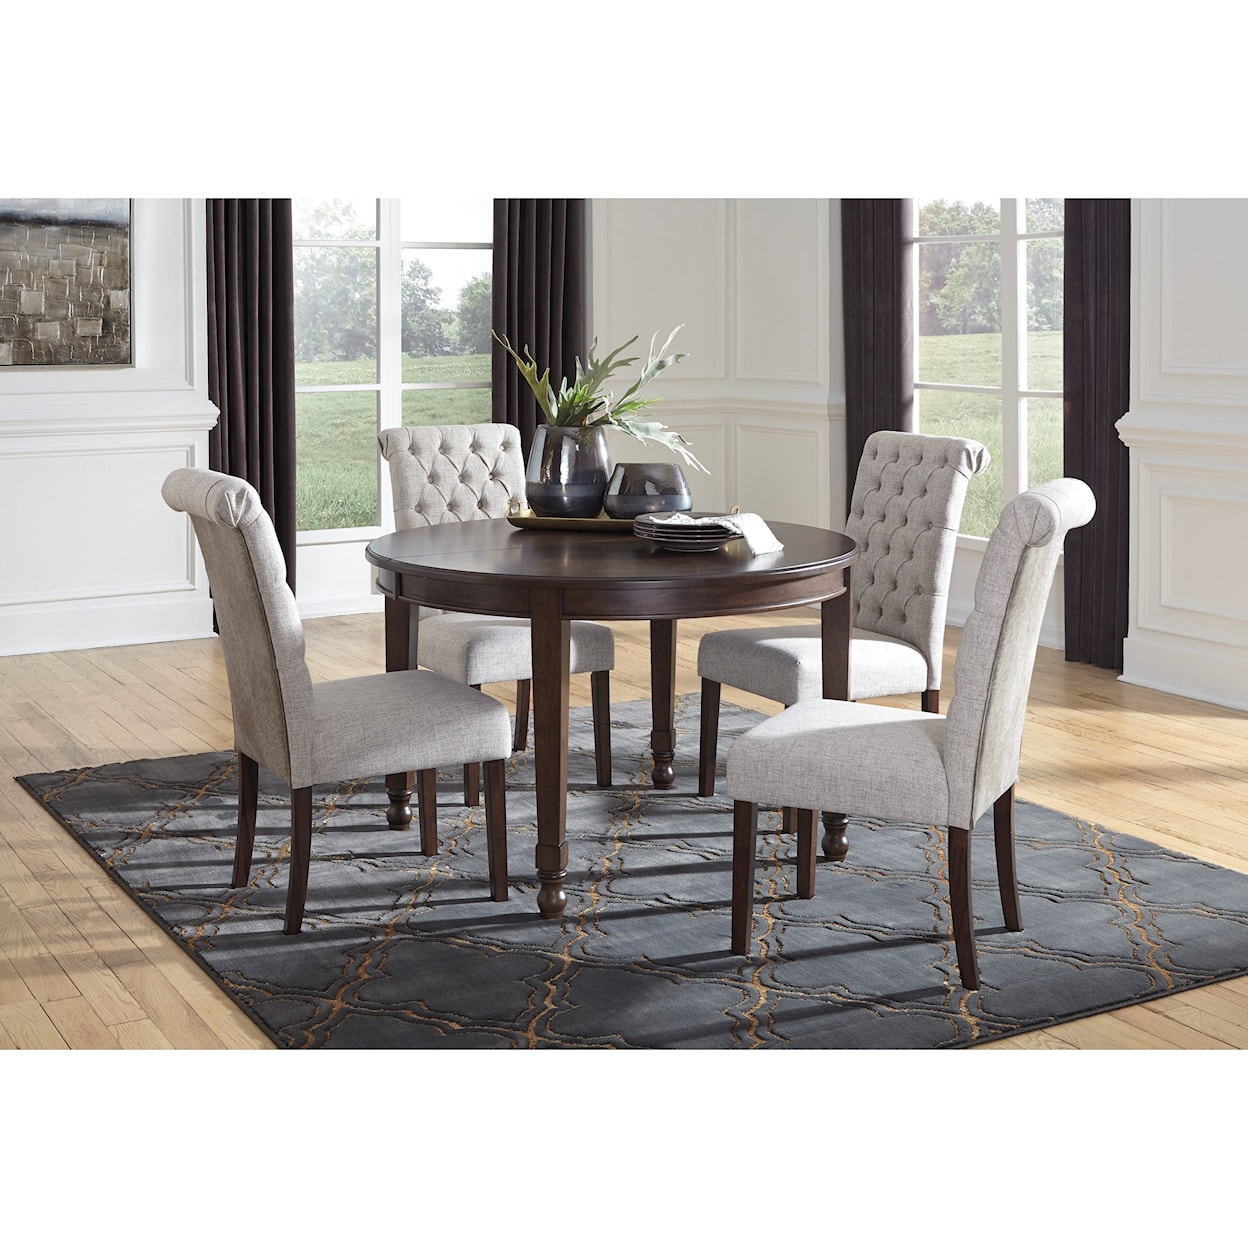 Ashley Signature Design Adinton Oval Dining Room Extension Table